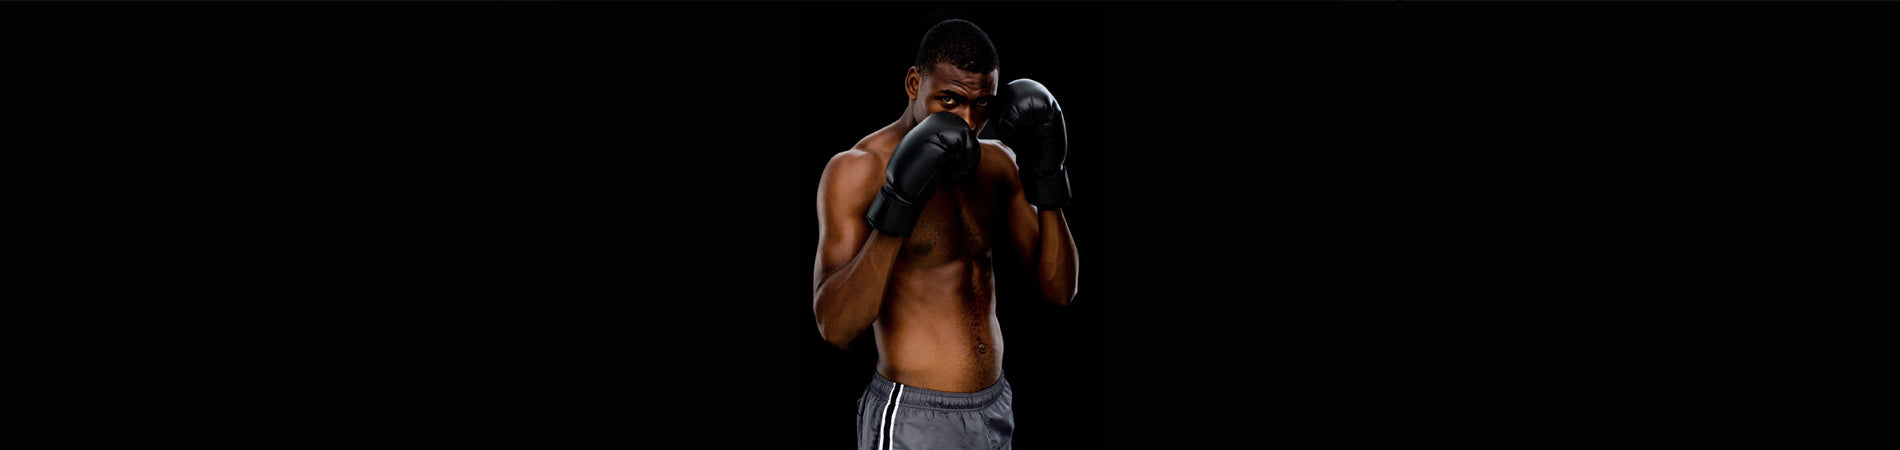 Defensive Stance: Tips to Keep Your Hands Up While Boxing